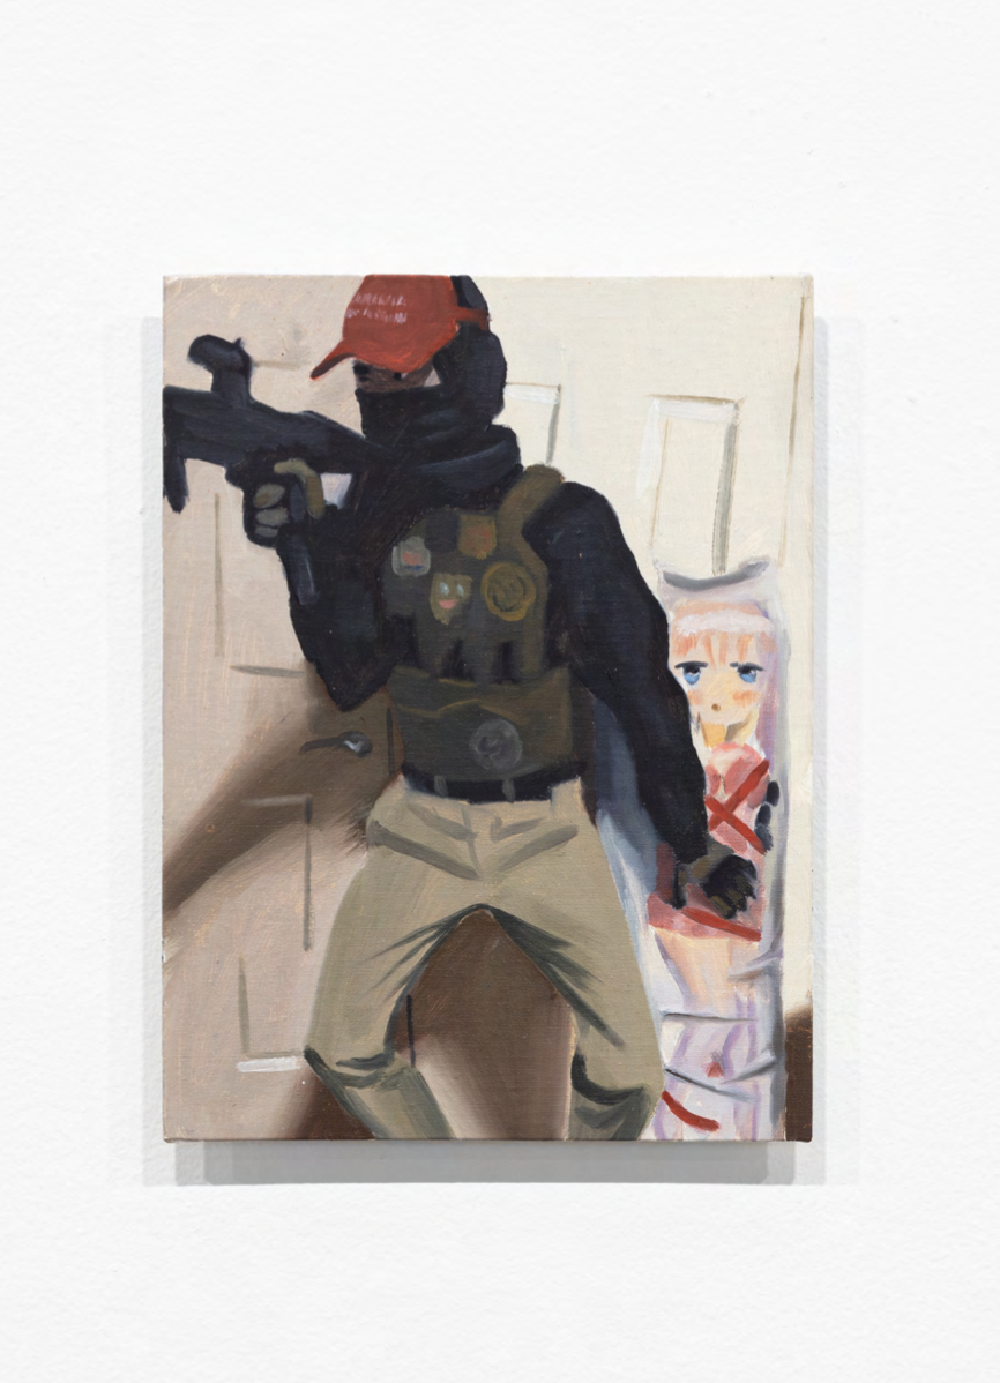 painting of a guy with bulletproof vest on and MAGA cap with a gun and an anime body pillow